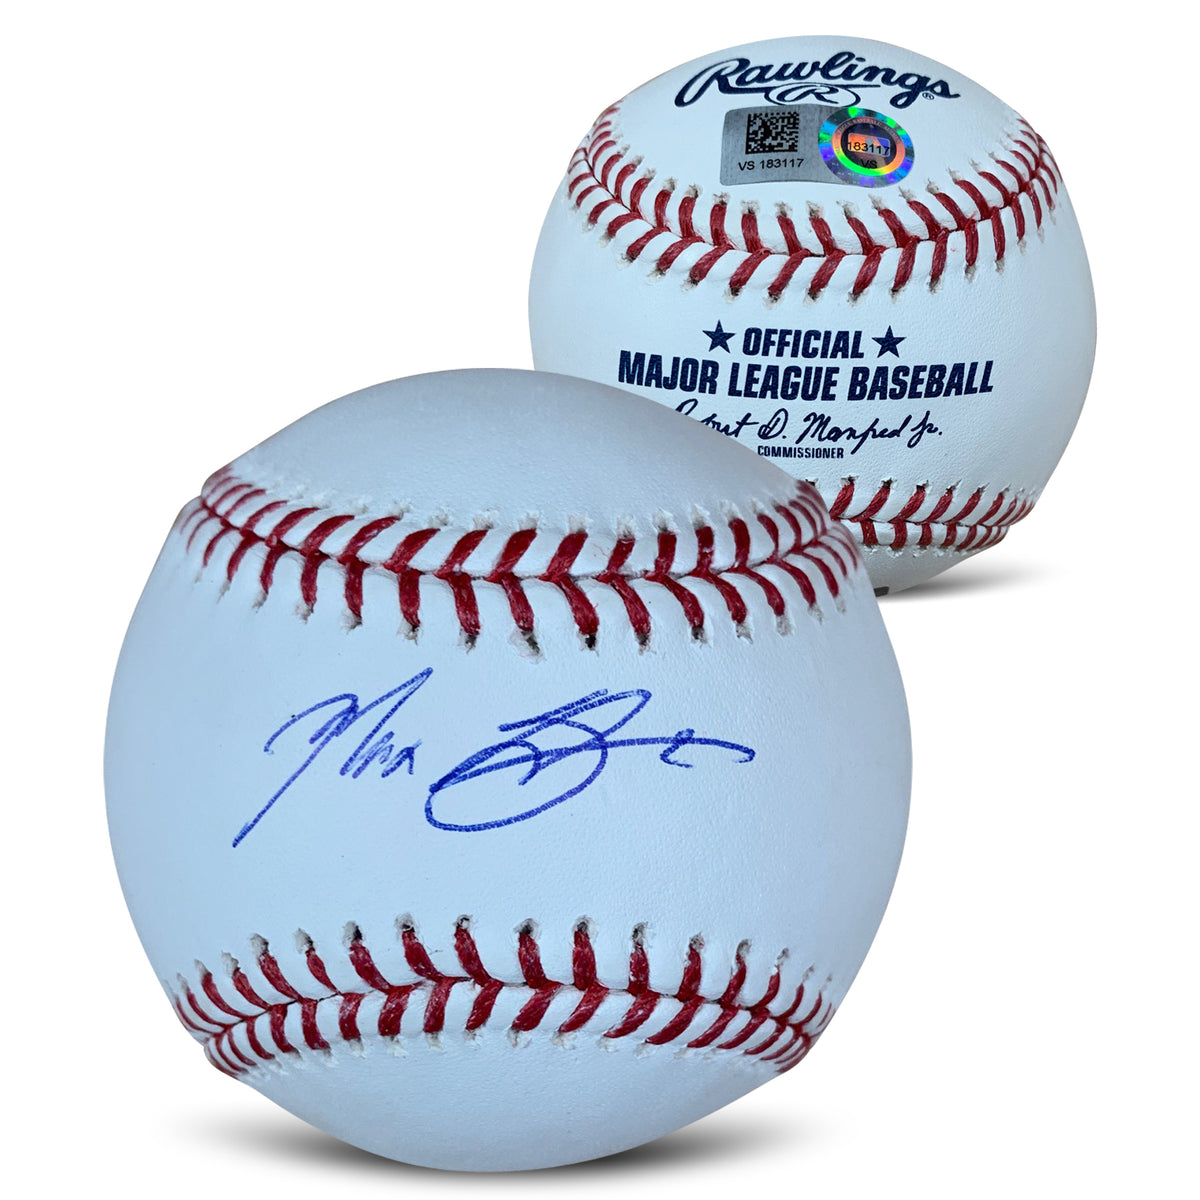 Max Scherzer Autographed Baseball MLB Authenticated Hologram Signed Wi